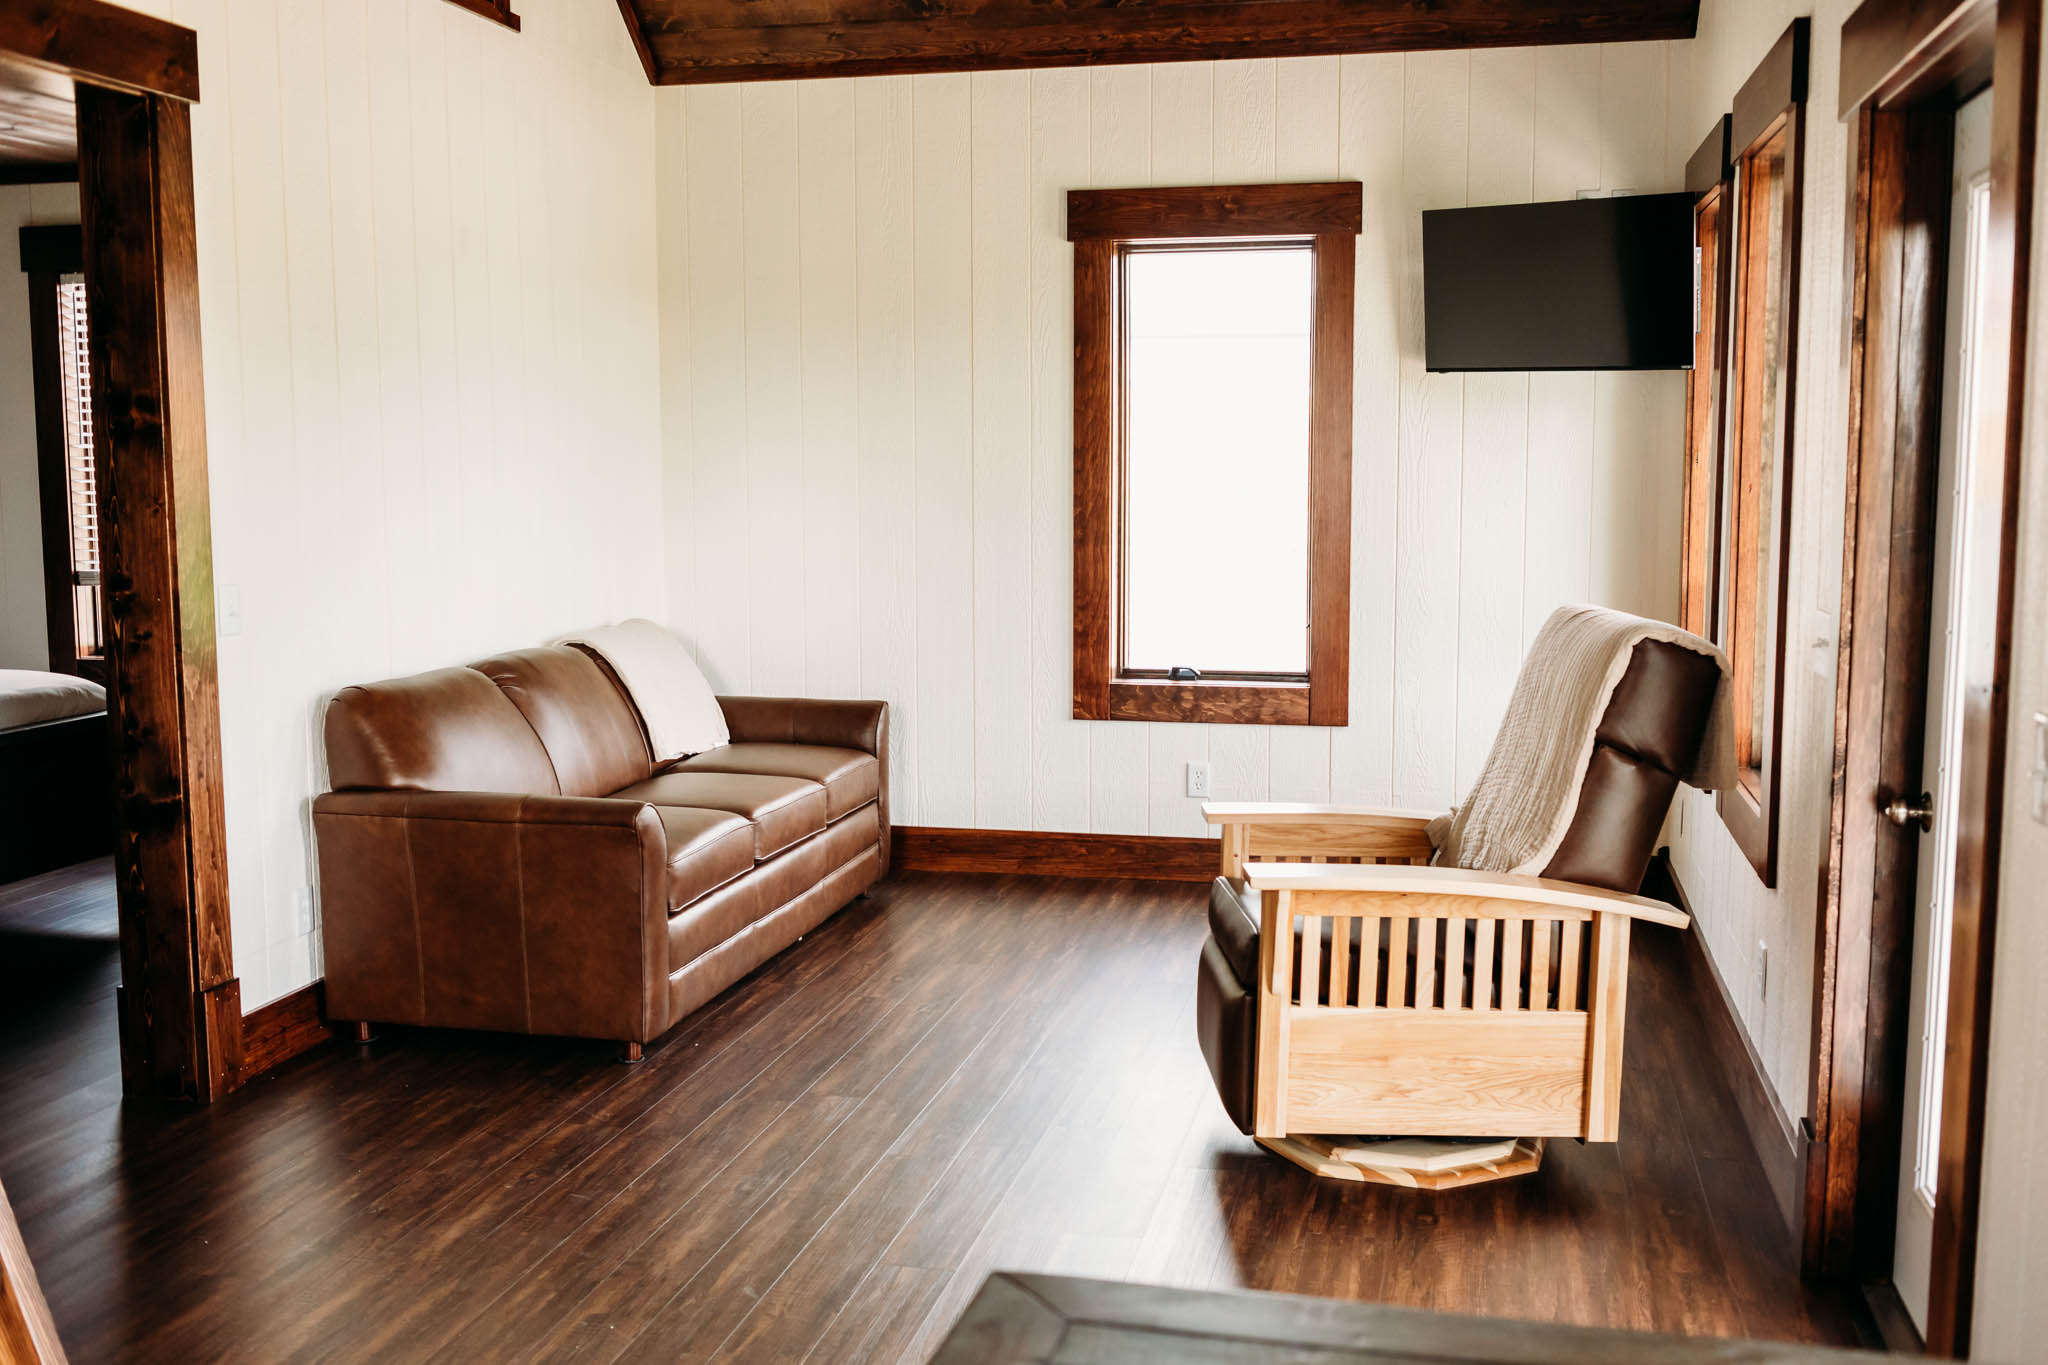 Inside the Villas at The VeNue. There is a brown leather queen sleeper sofa and brown leather and wooden rocking chair with a tan blanket folded over the back